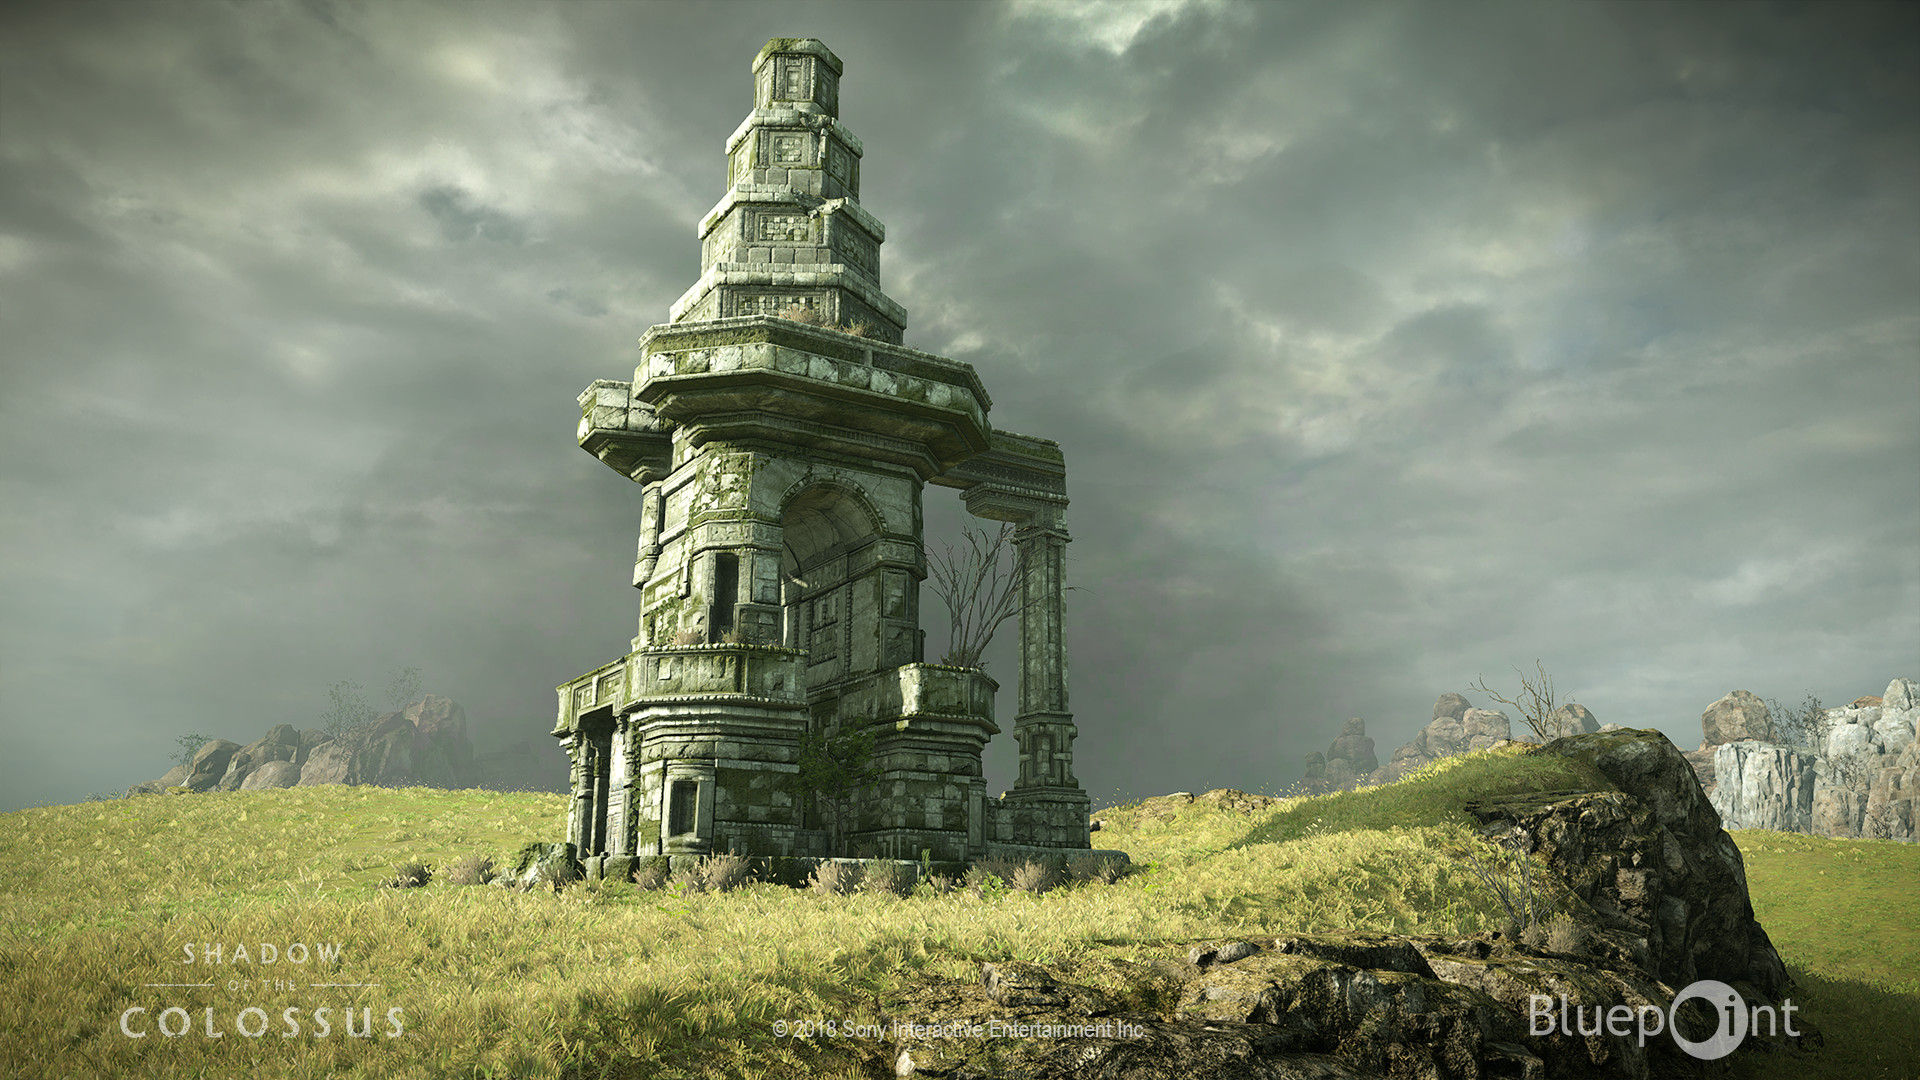 Shadow of the Colossus' and the Art of Ma